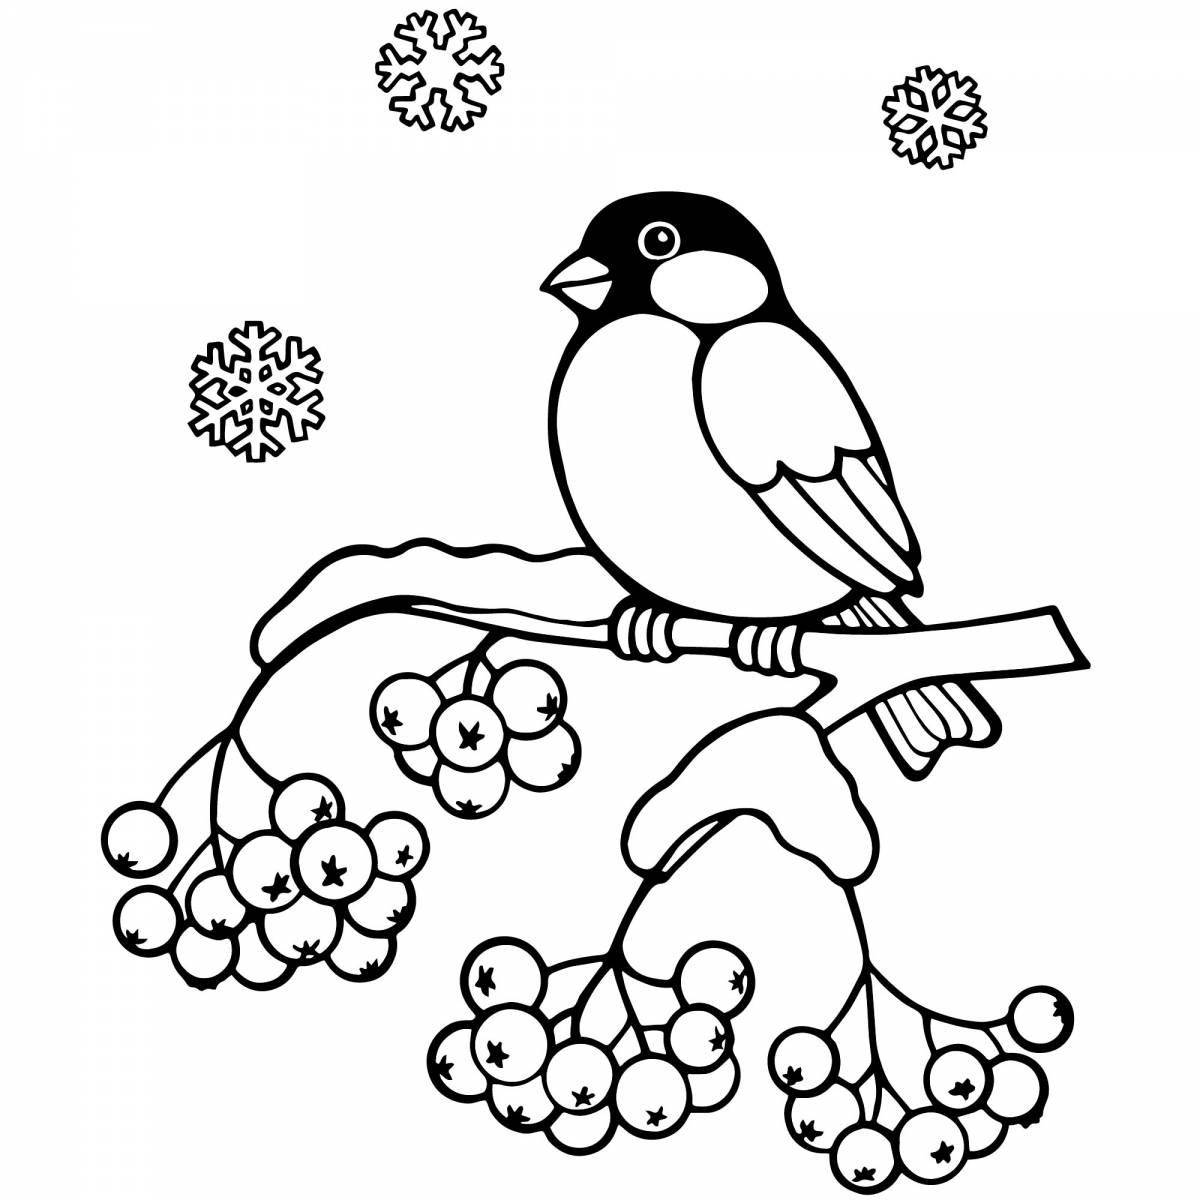 Colouring awesome winter birds